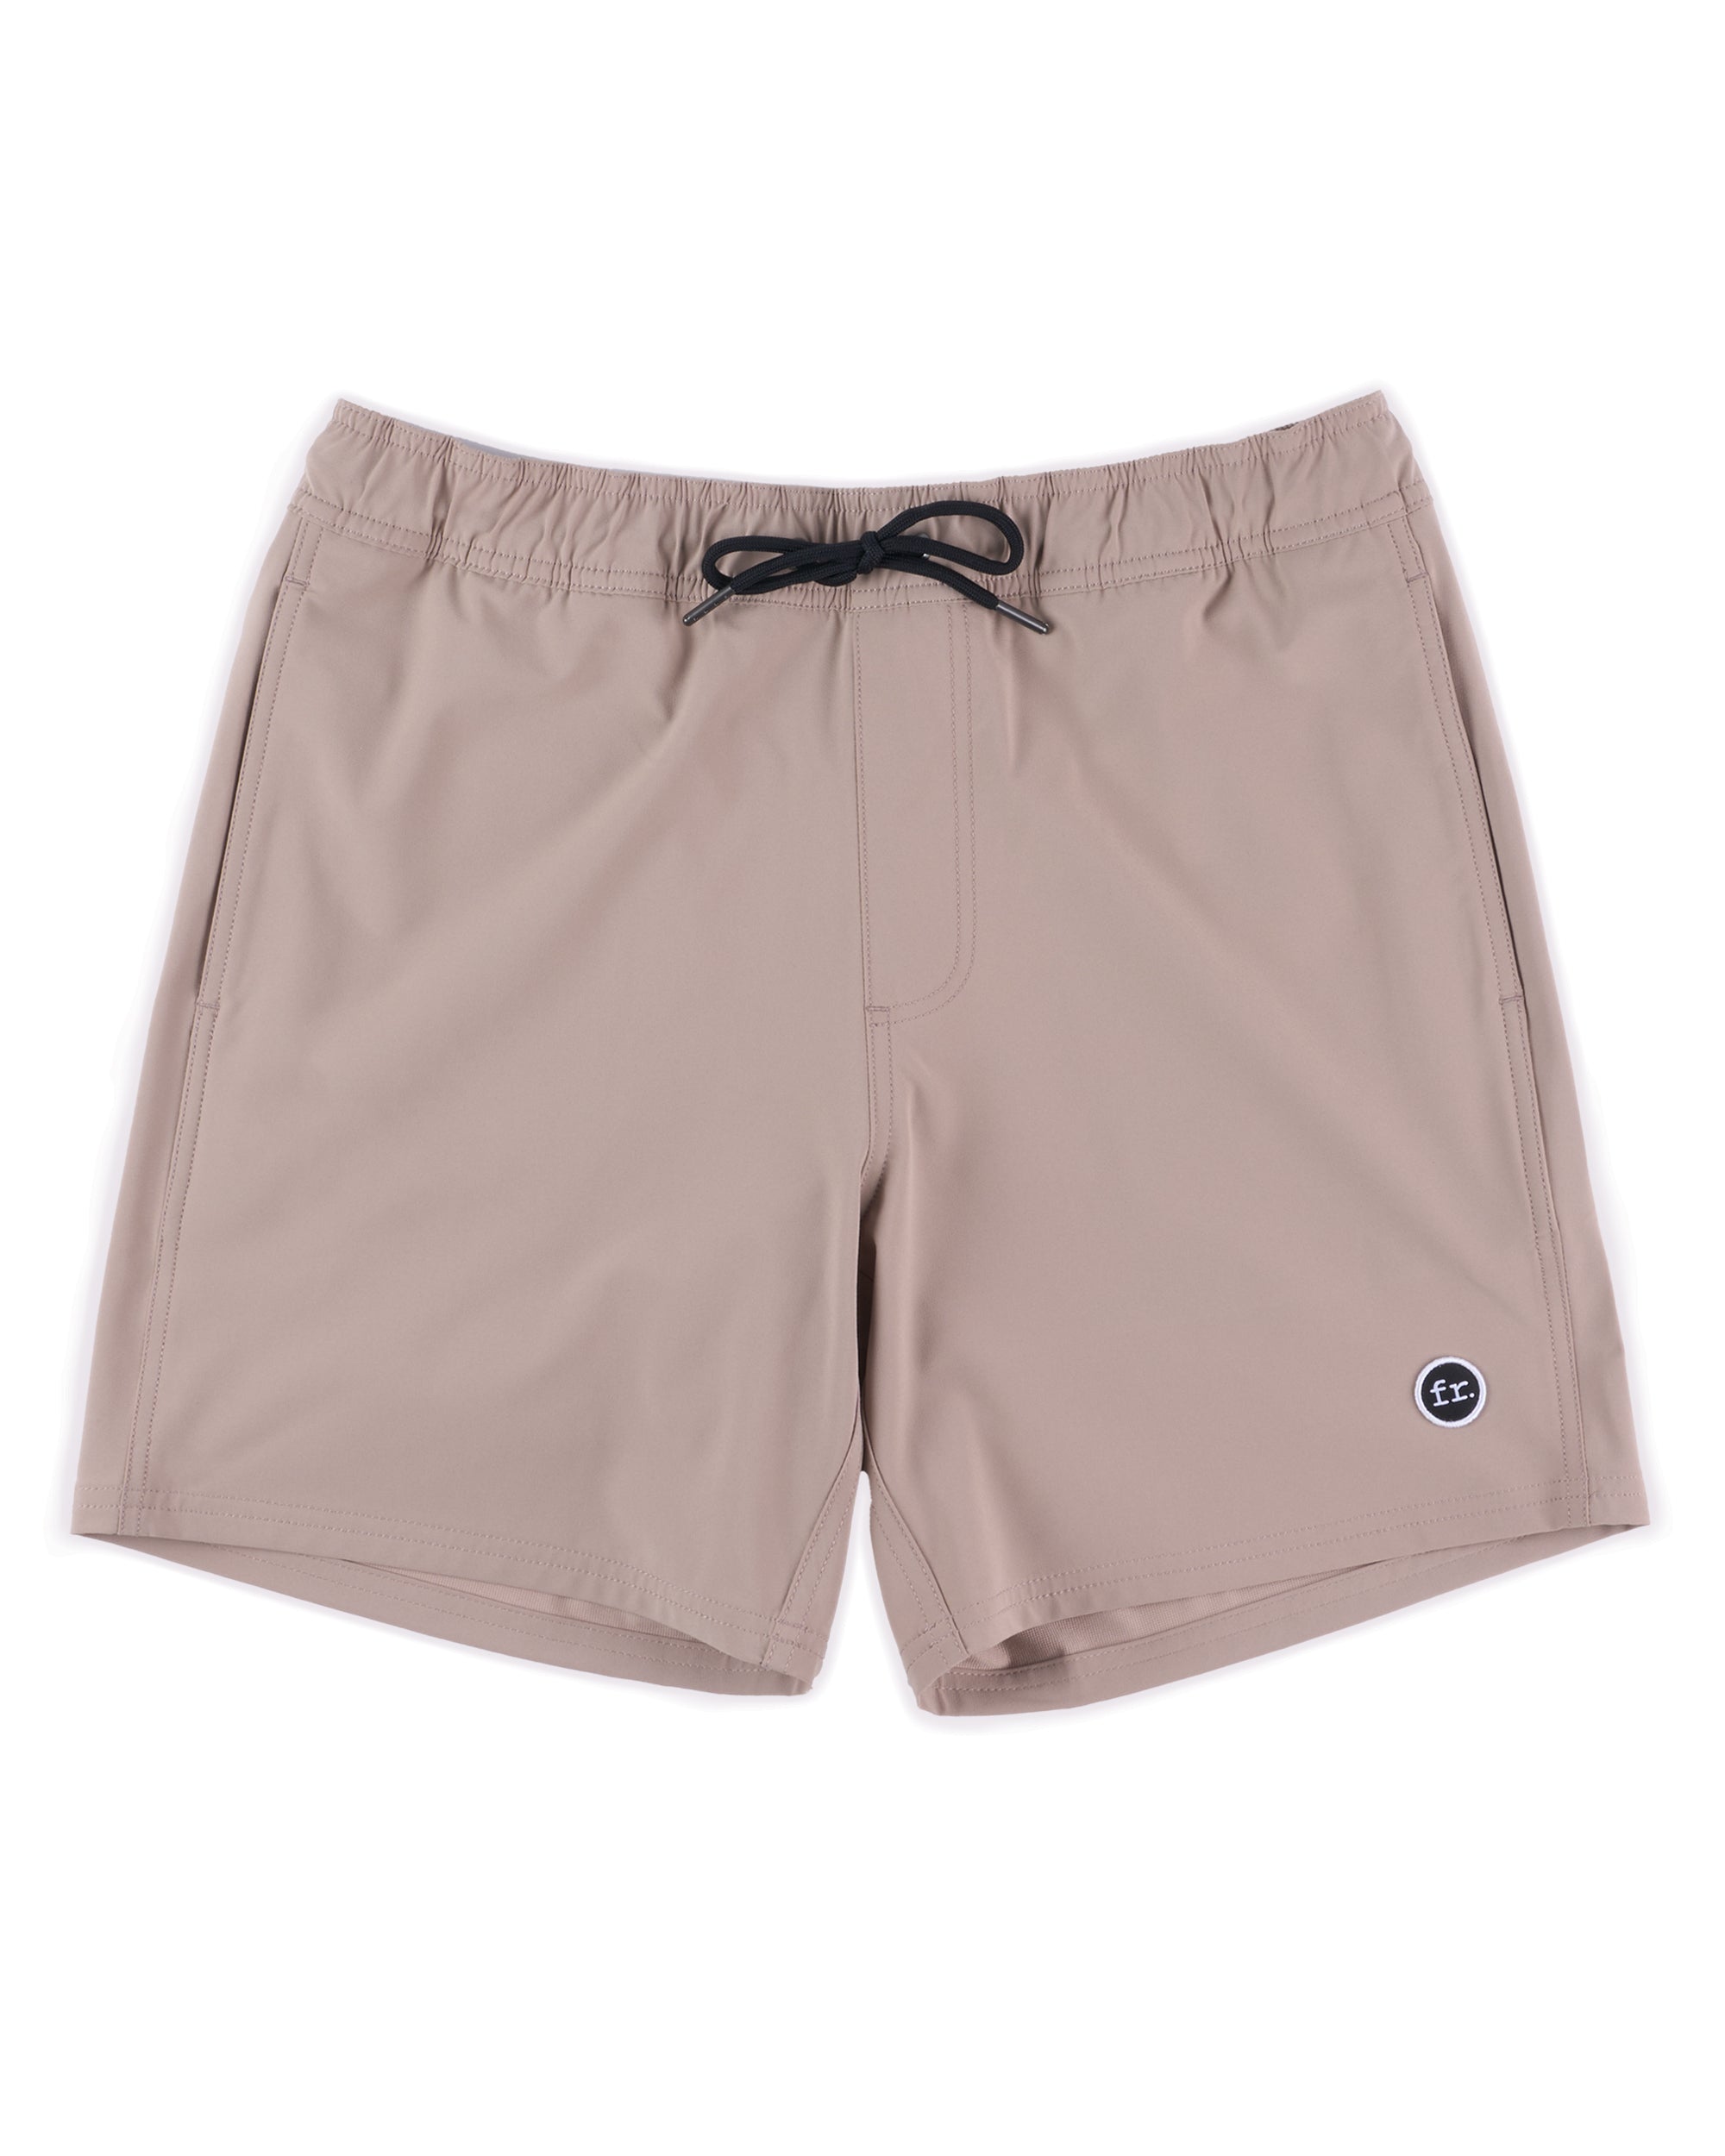 FR. Utility Boardshorts Tan - Foreign Rider Co.